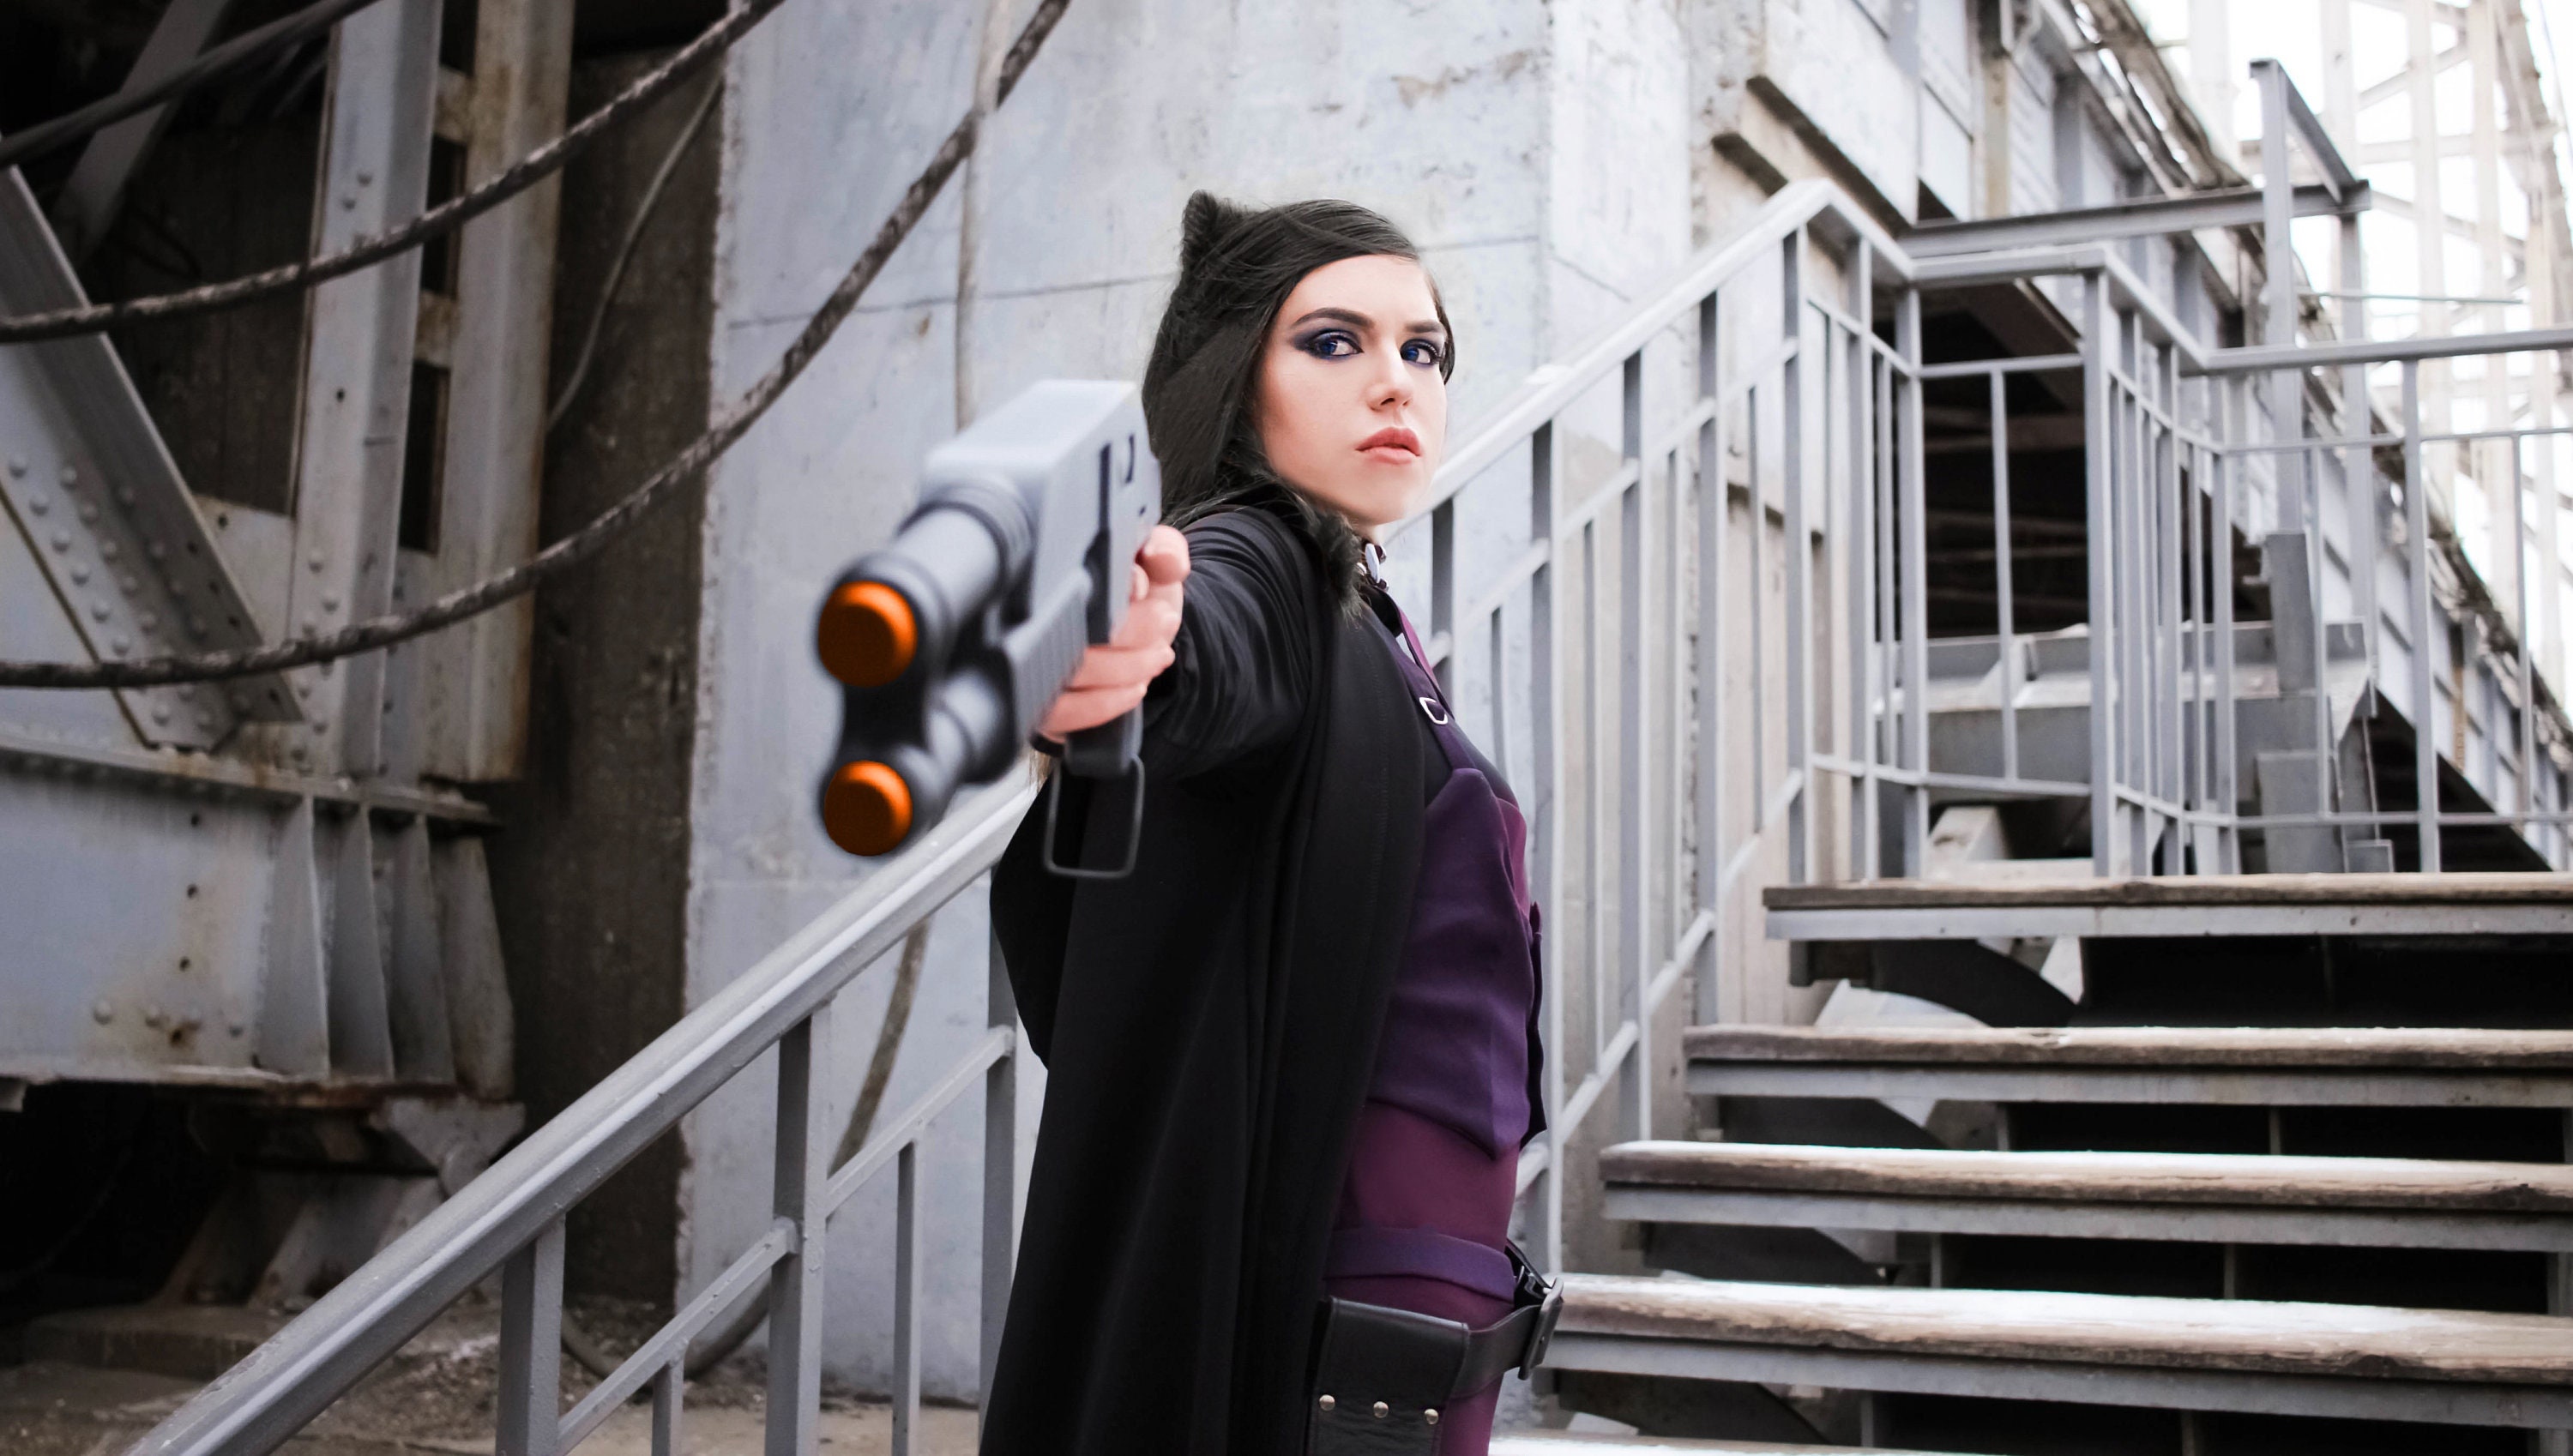 Cecine Cosplay - Character/Series: Re-l Mayer (Ergo Proxy